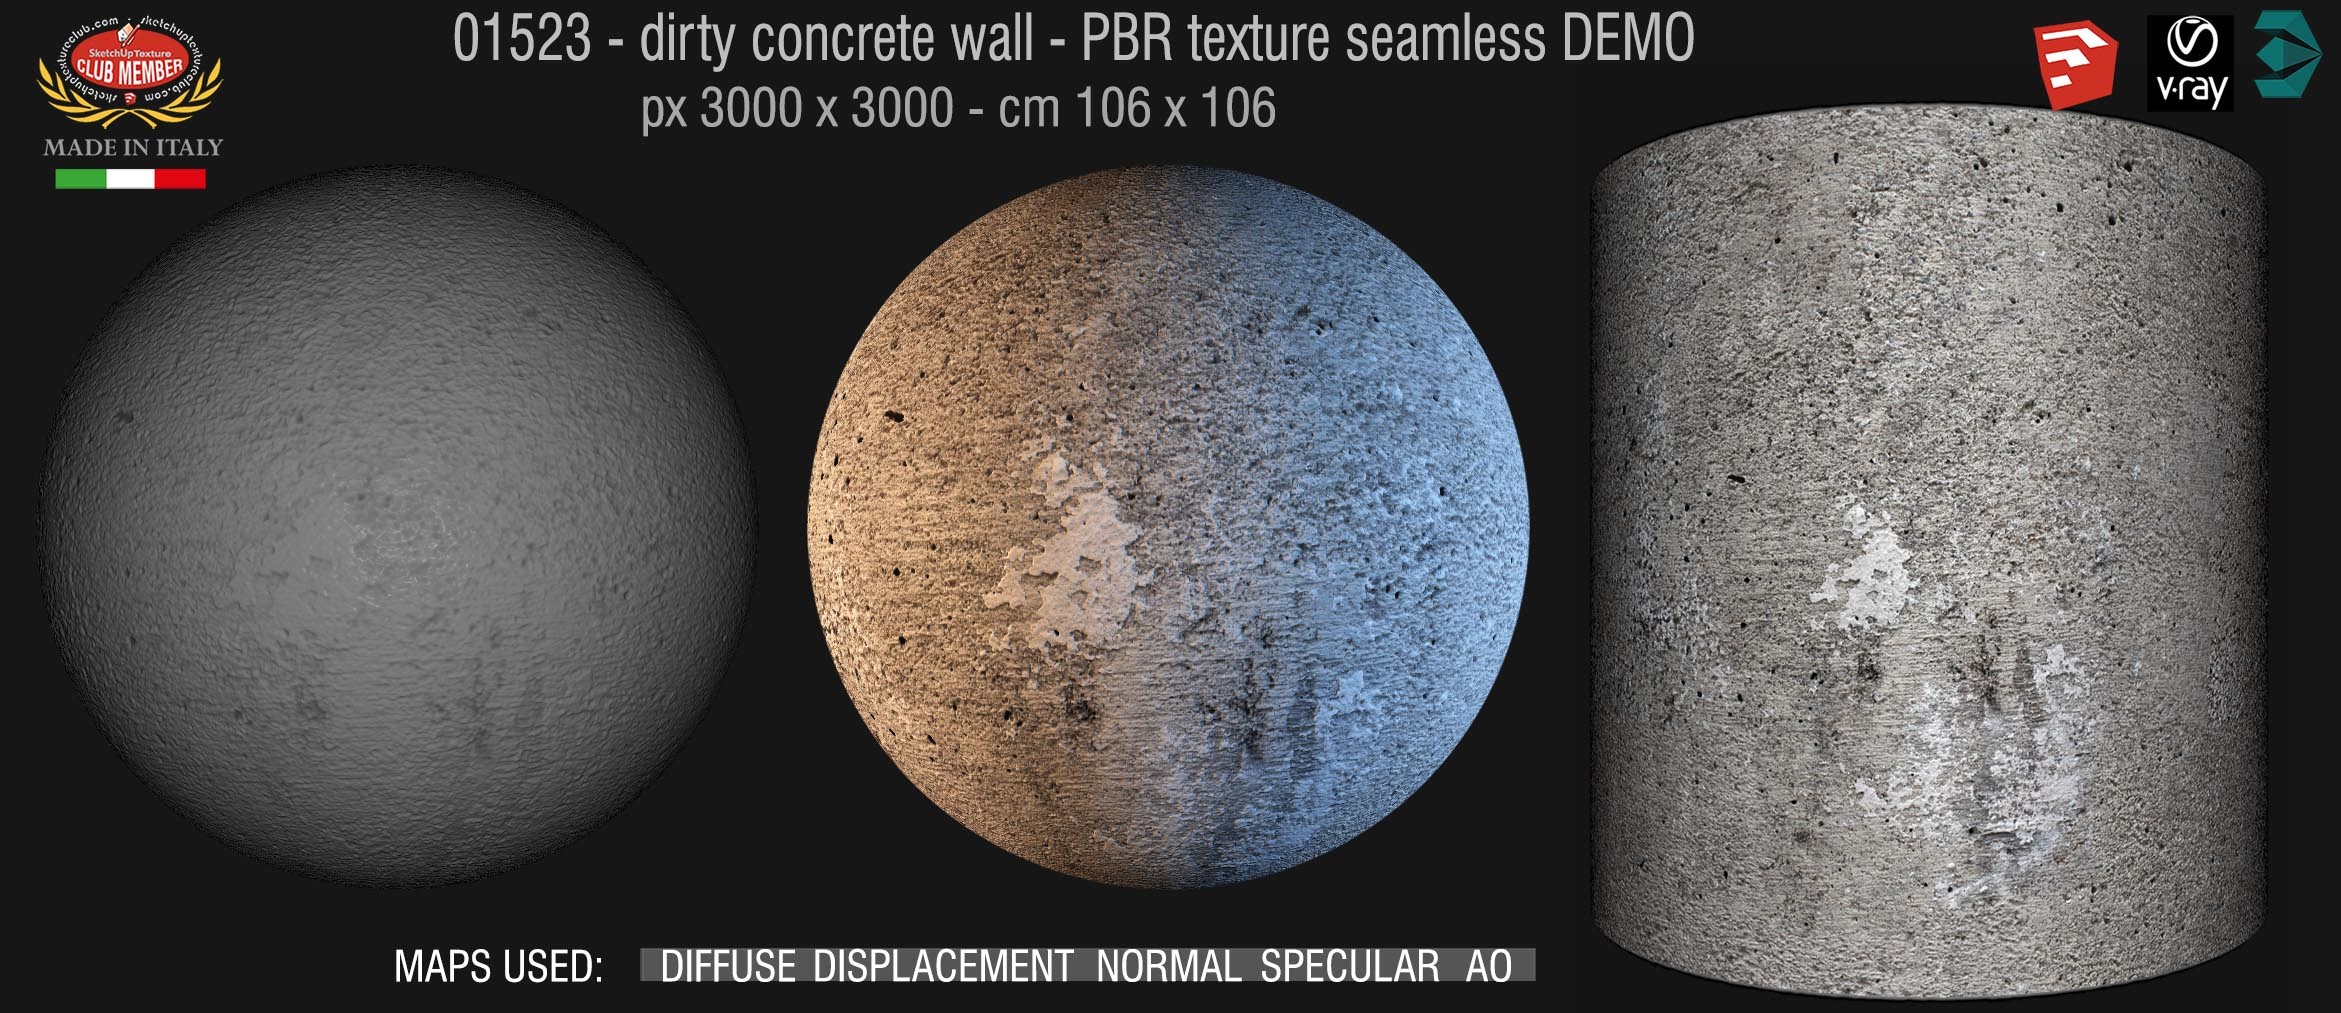 01523 Concrete bare dirty wall PBR texture seamless DEMO